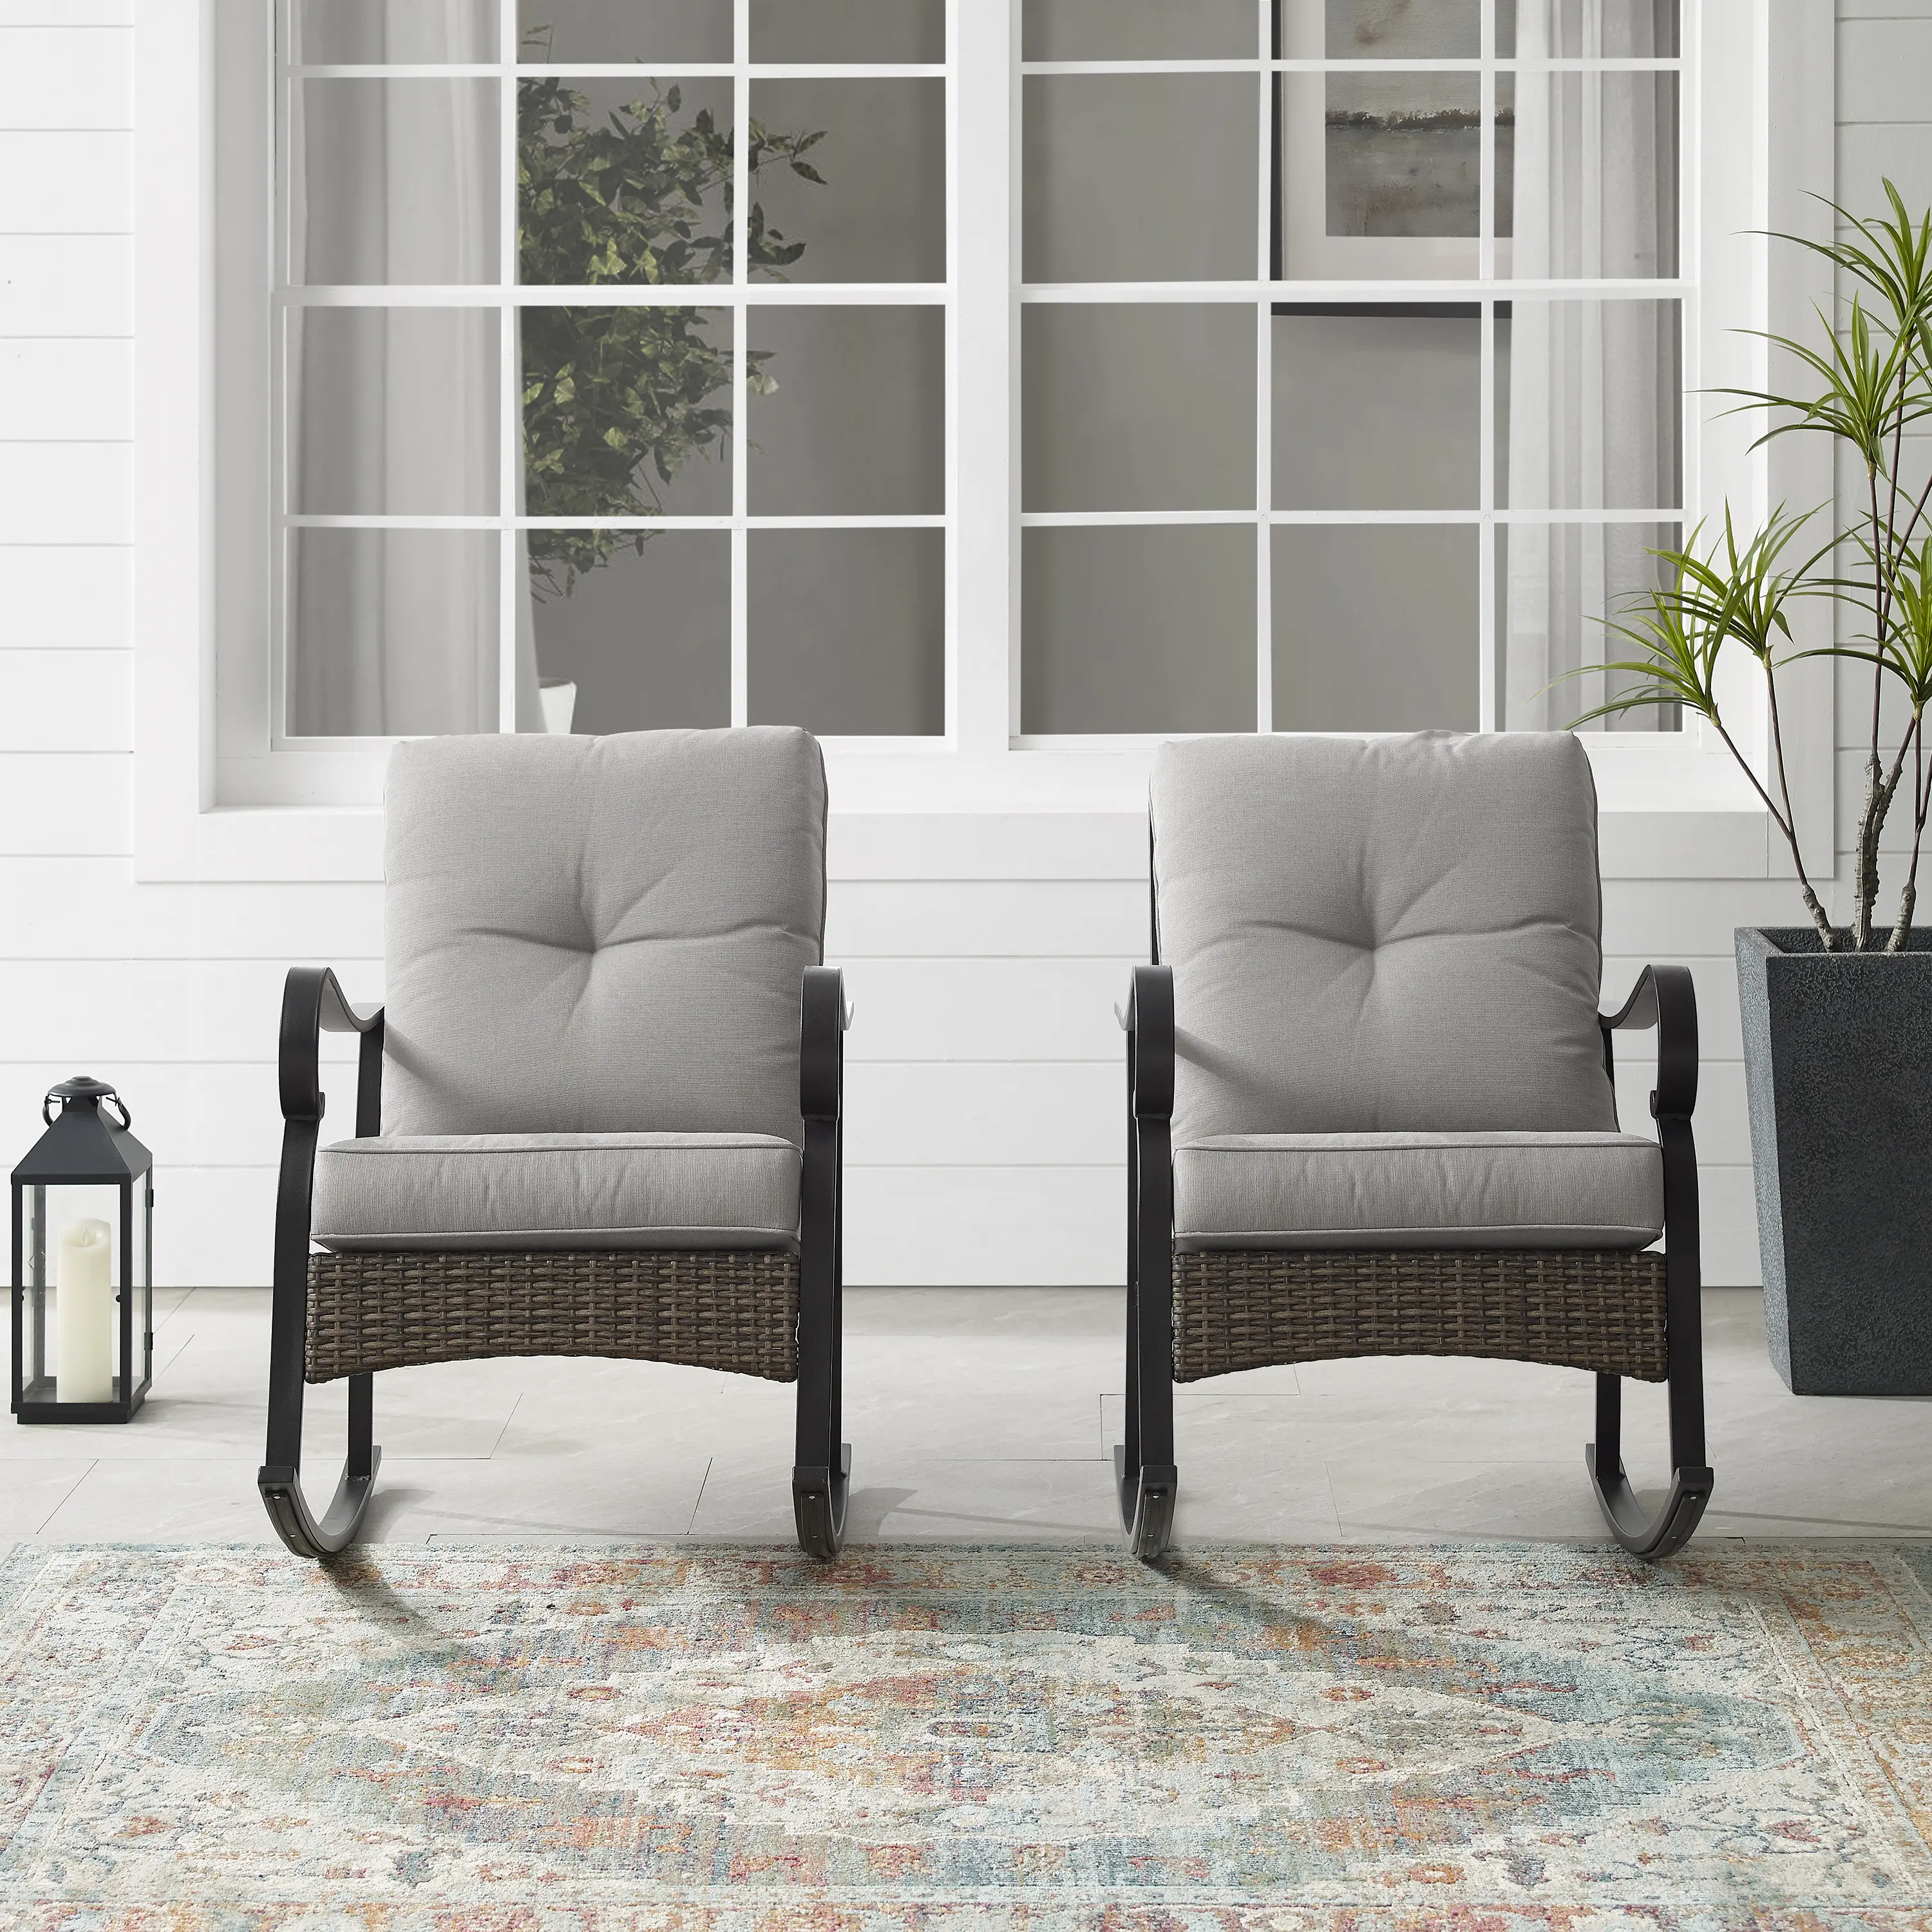 Dahlia Metal and Wicker Patio Rocking Chairs, Set of 2